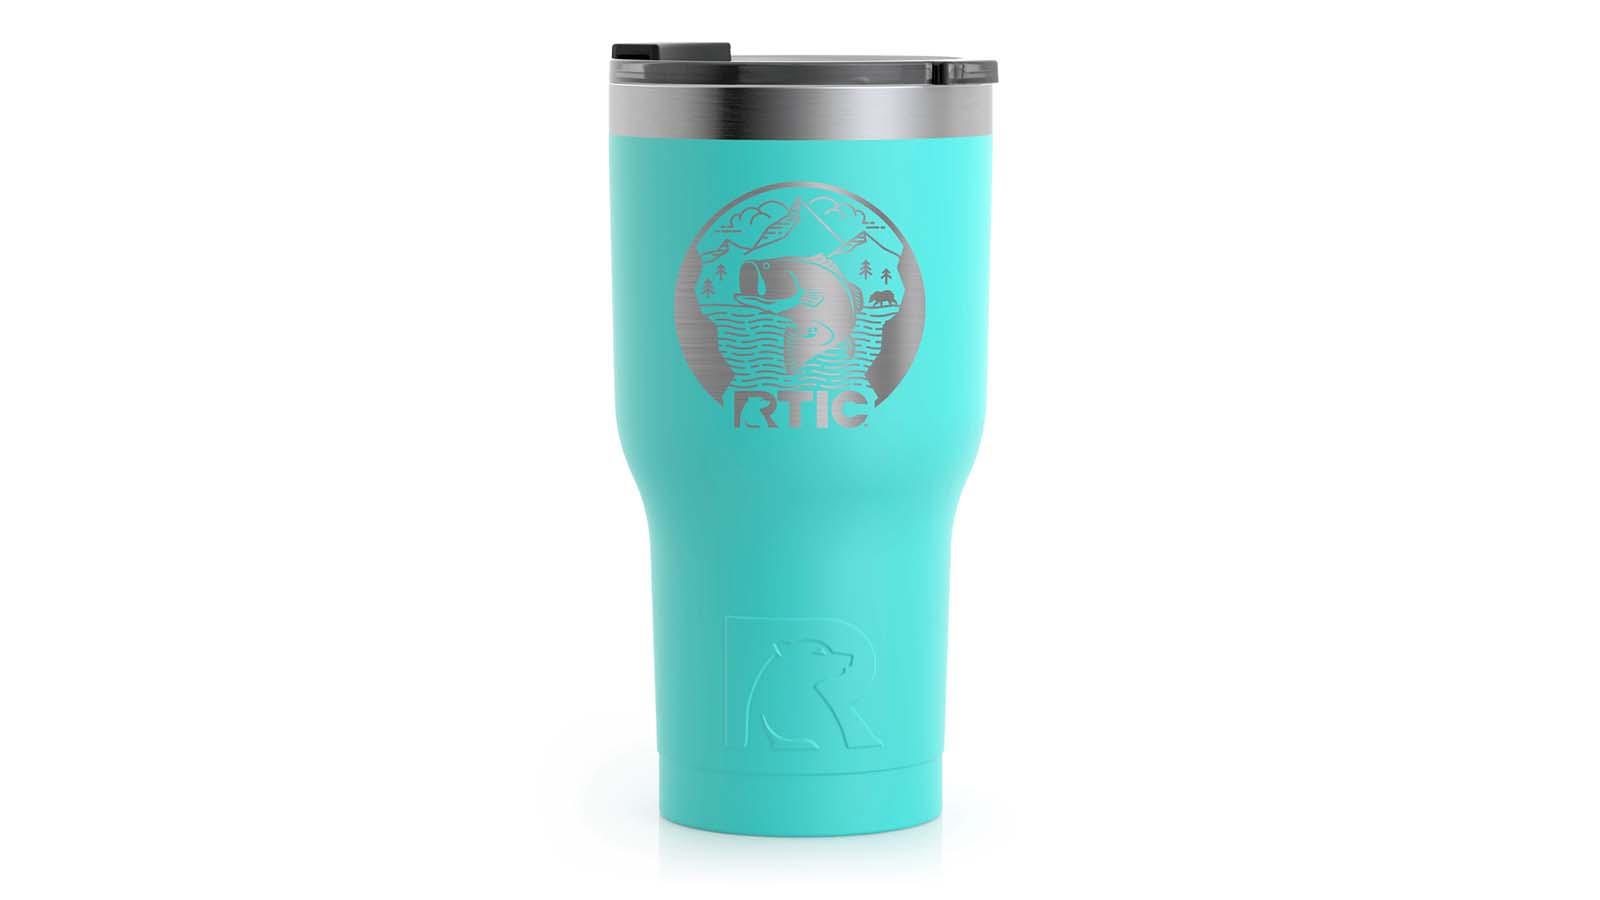 CHTENZY Insulated Travel Coffee Mug With Lid, Hot and Cold, Stainless Steel  Cups, Transparent Lid, P…See more CHTENZY Insulated Travel Coffee Mug With